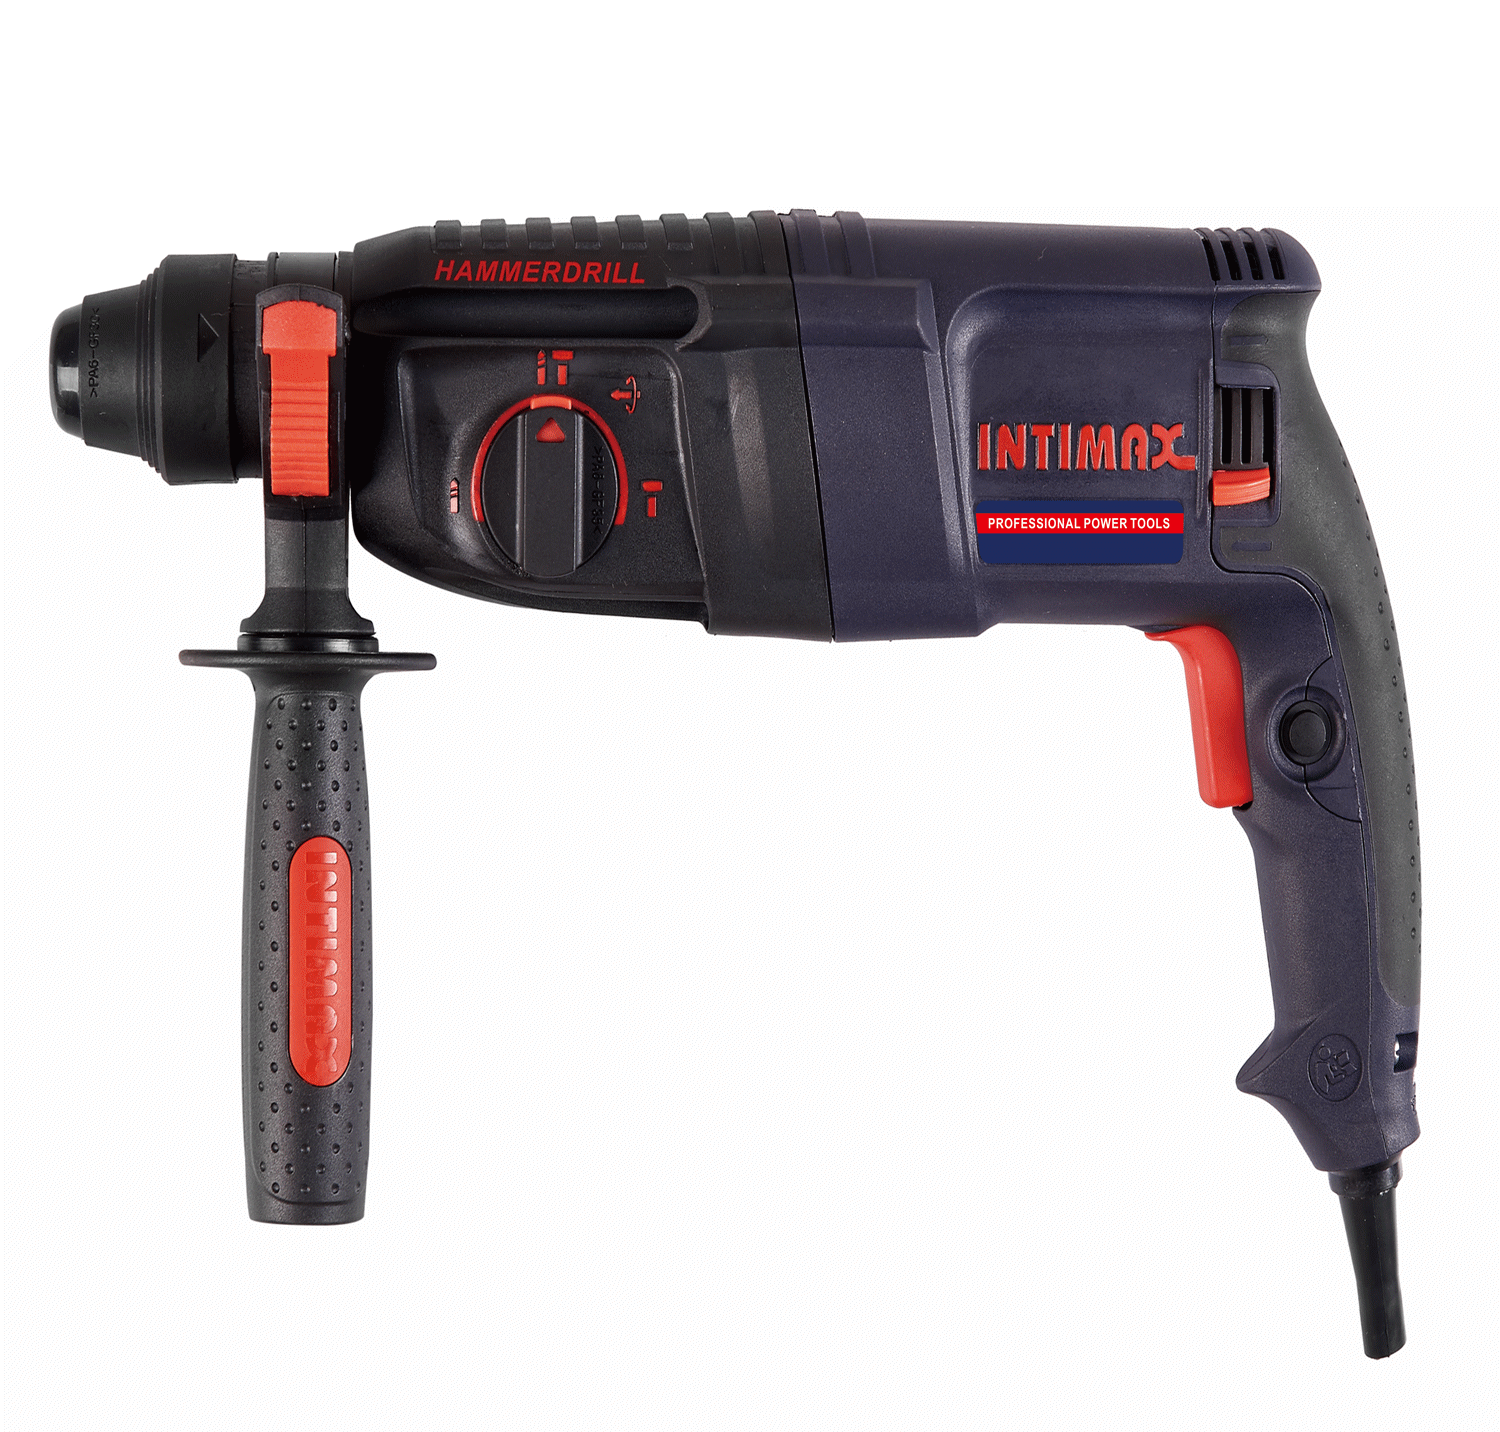 Electric Power Tools Demolition Hammer Angle Grinder Rotary Hammer Impact Drill